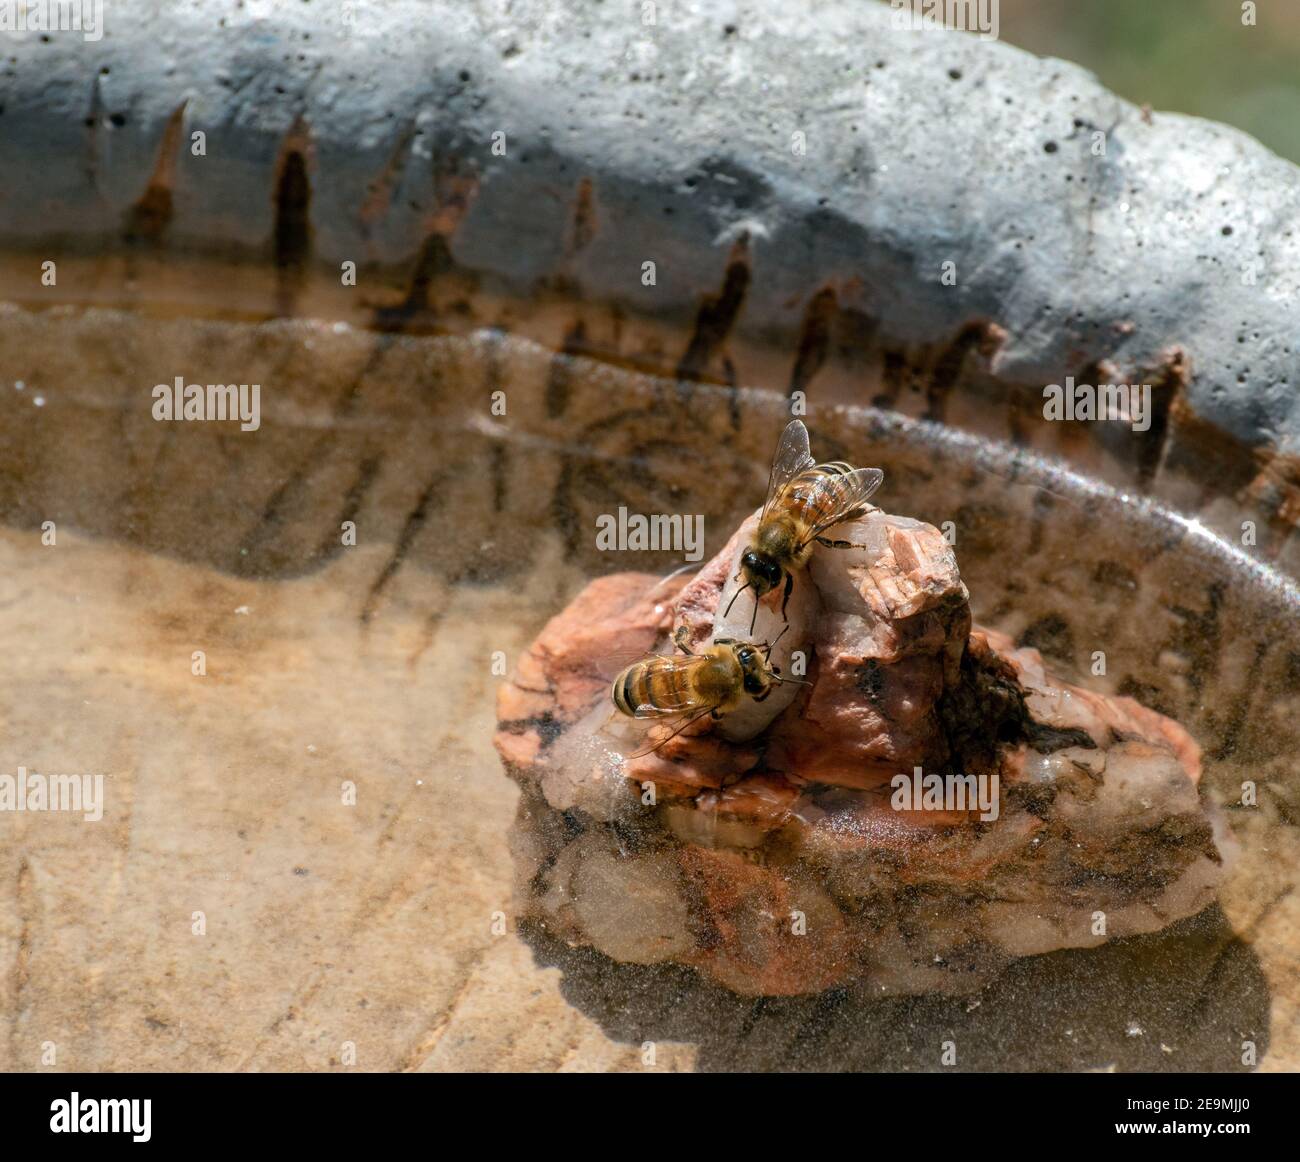 A close up look at two honey bees standing on a rock inside the cement birdbath where the bees are getting a drink of water. Bokeh effect. Stock Photo